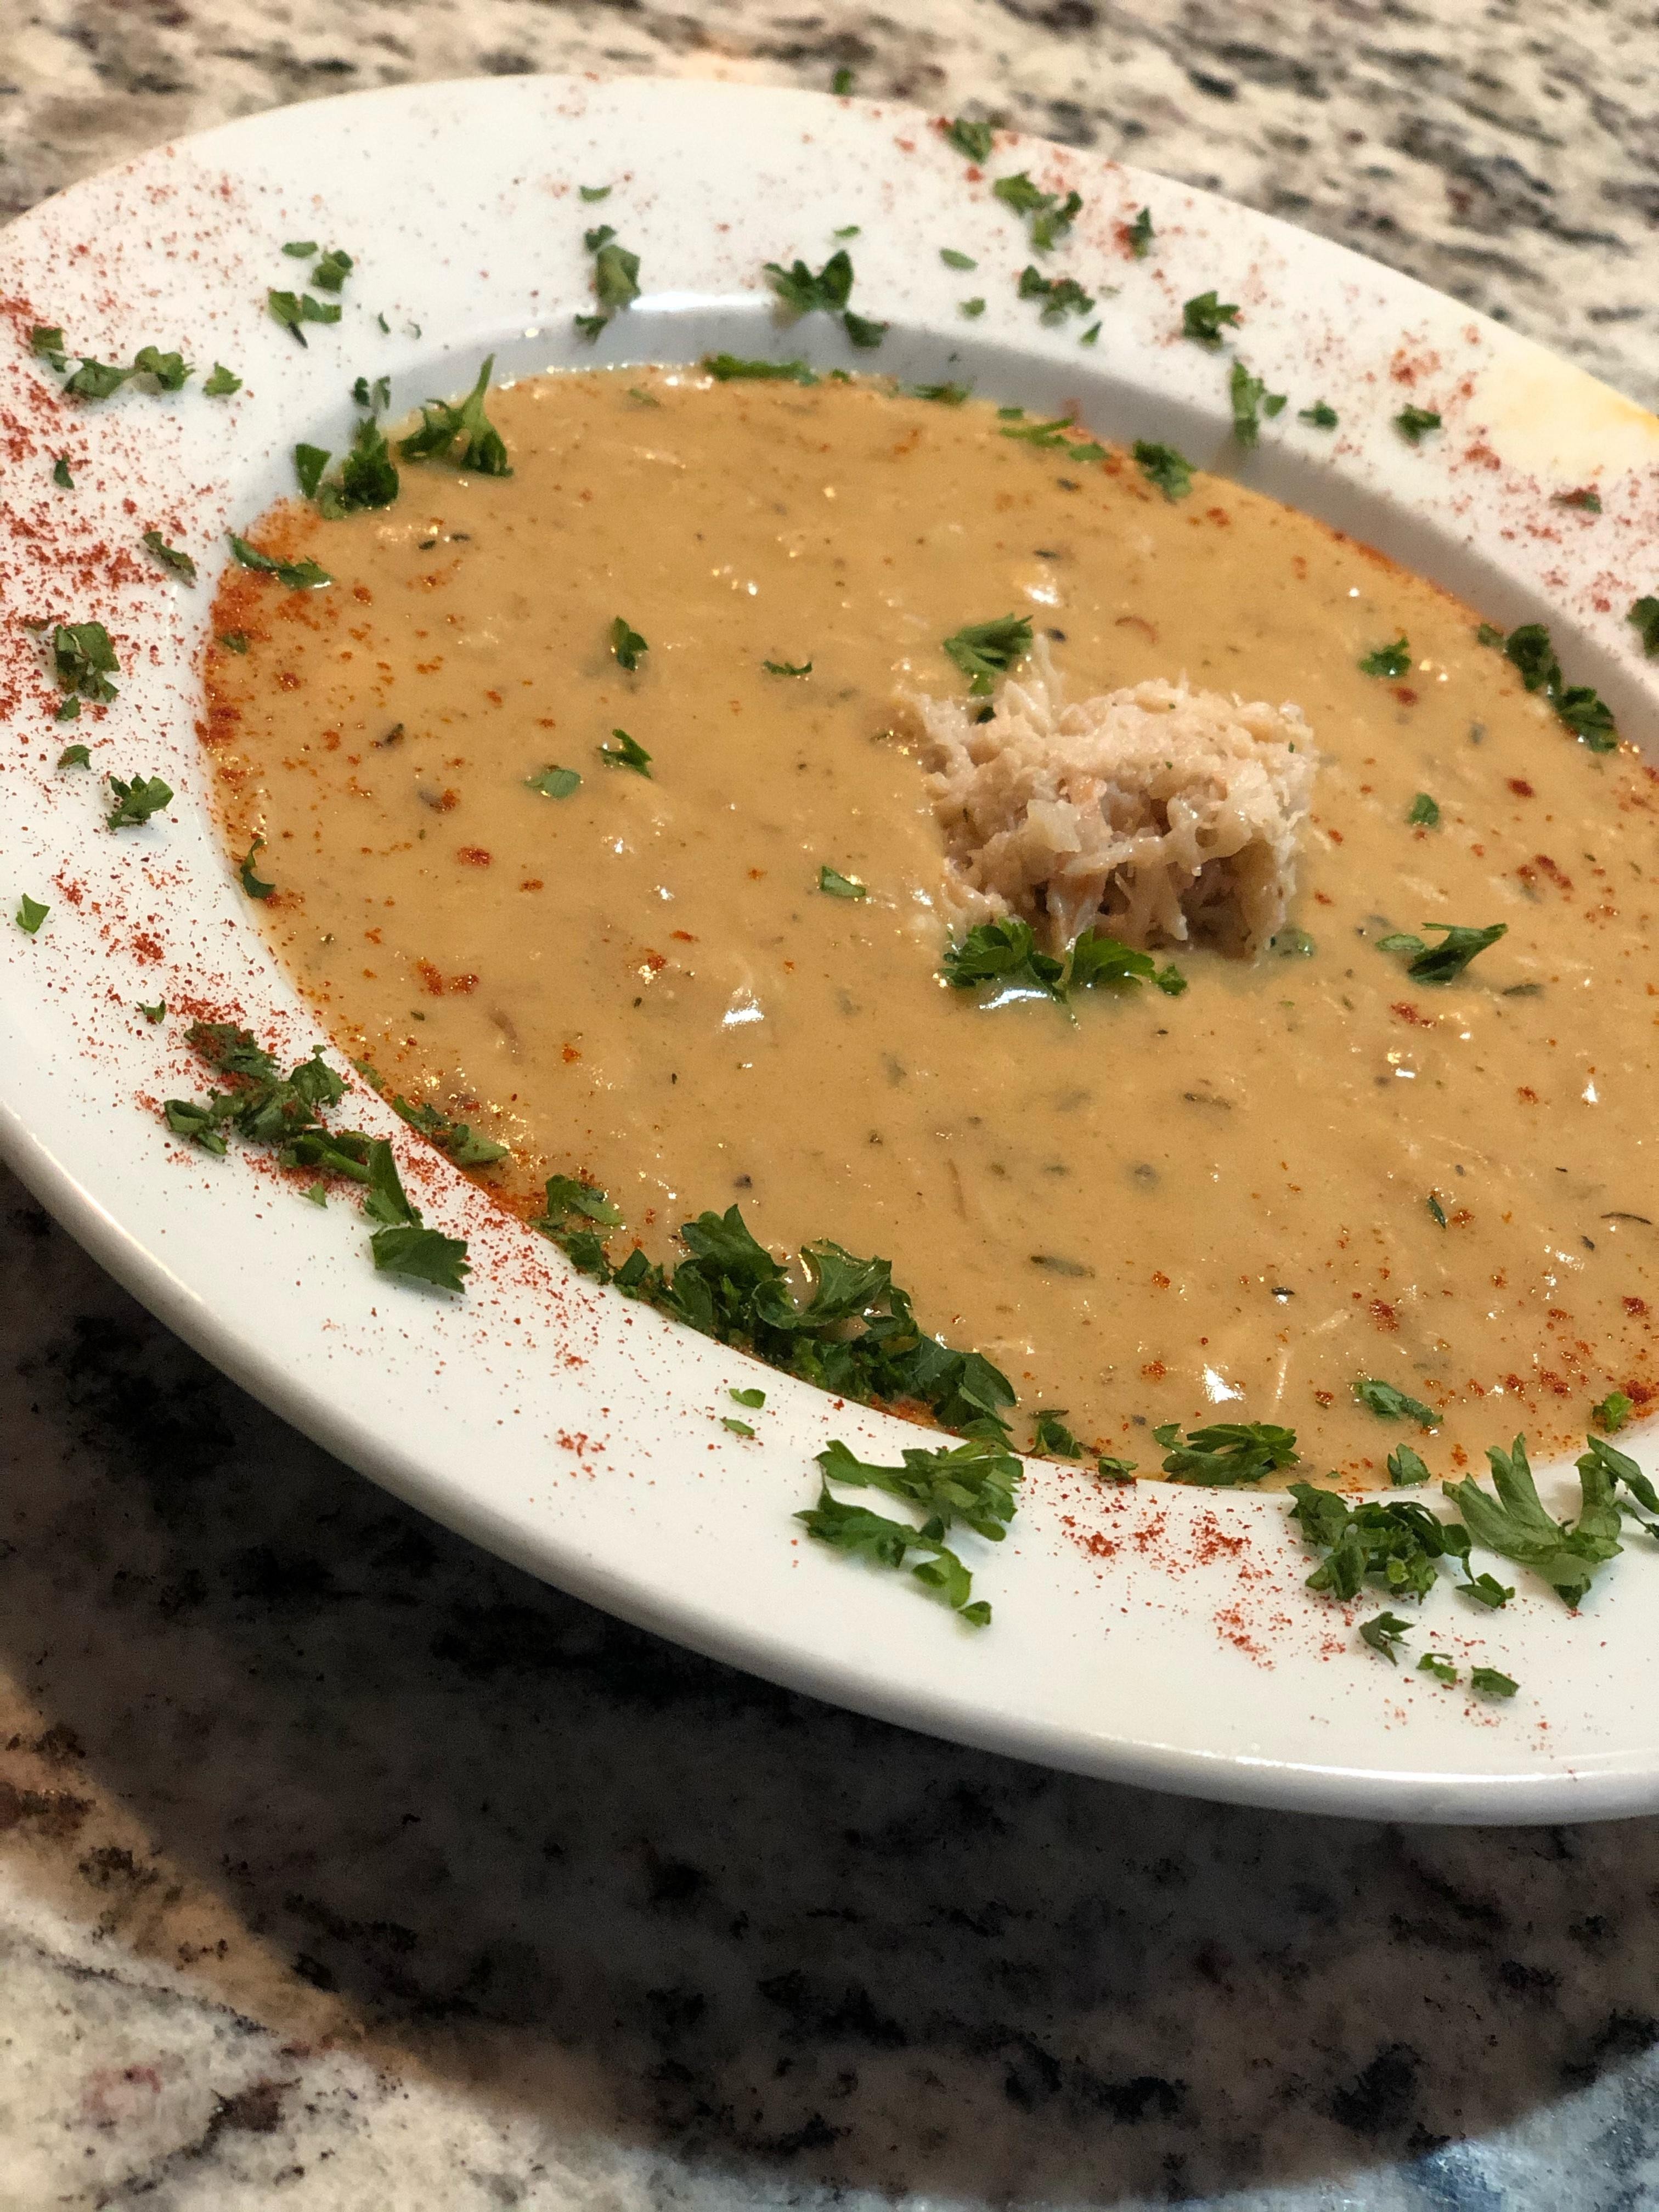 Chef Michael's She Crab Bisque